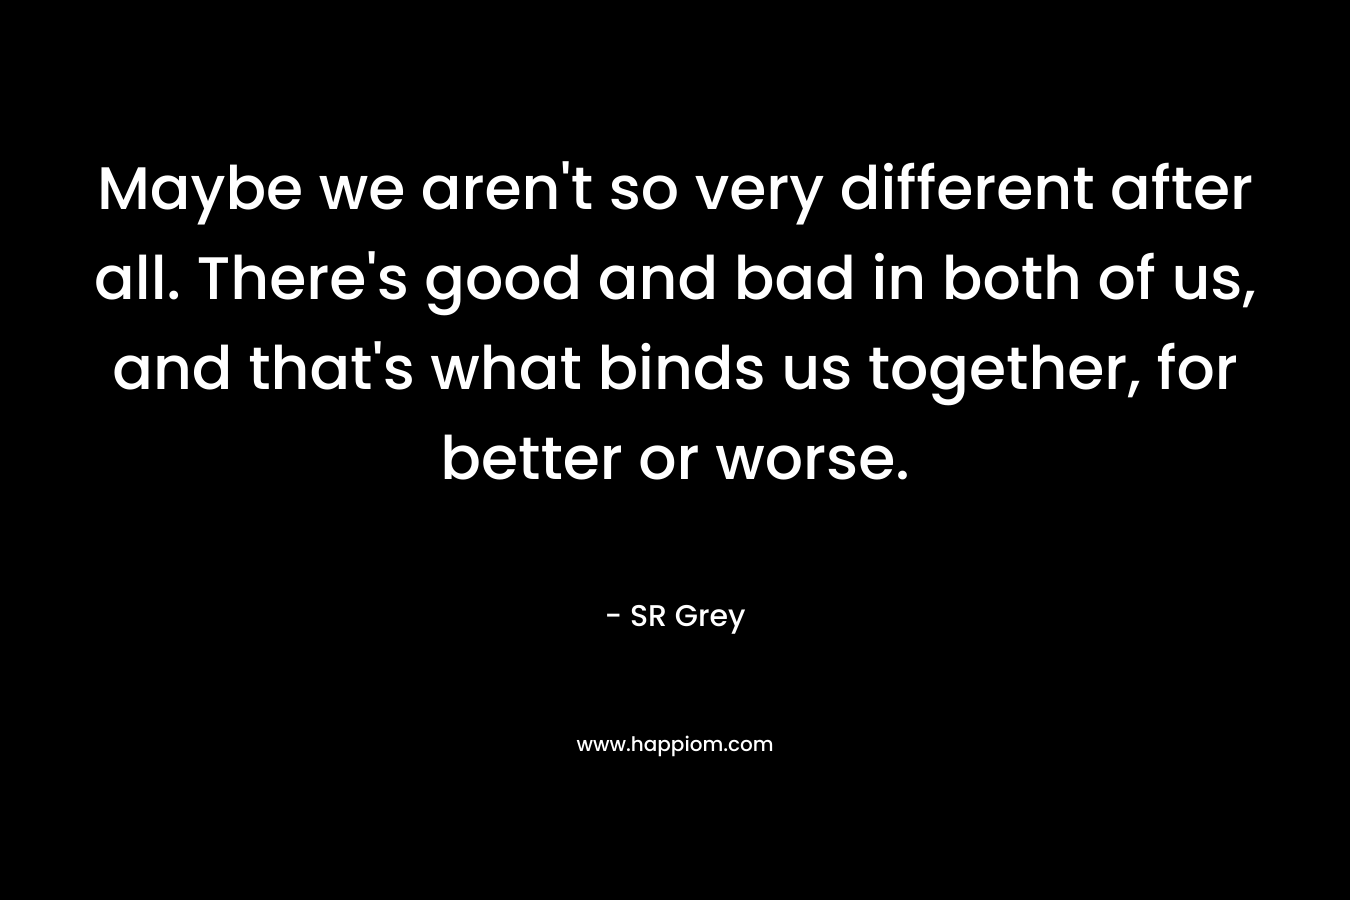 Maybe we aren’t so very different after all. There’s good and bad in both of us, and that’s what binds us together, for better or worse. – SR Grey